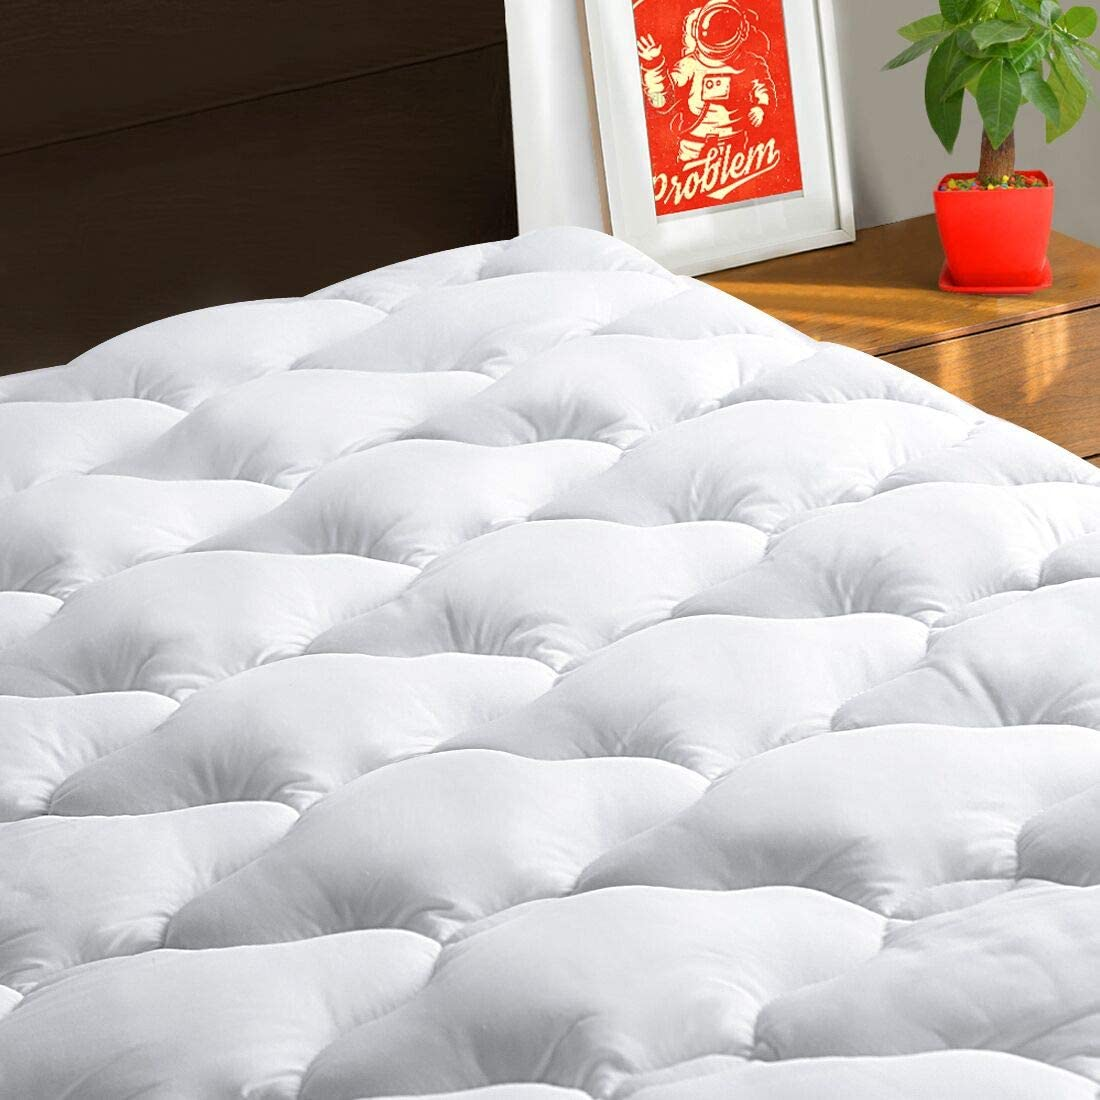 The different uses of mattress pads vs. mattress covers and protectors